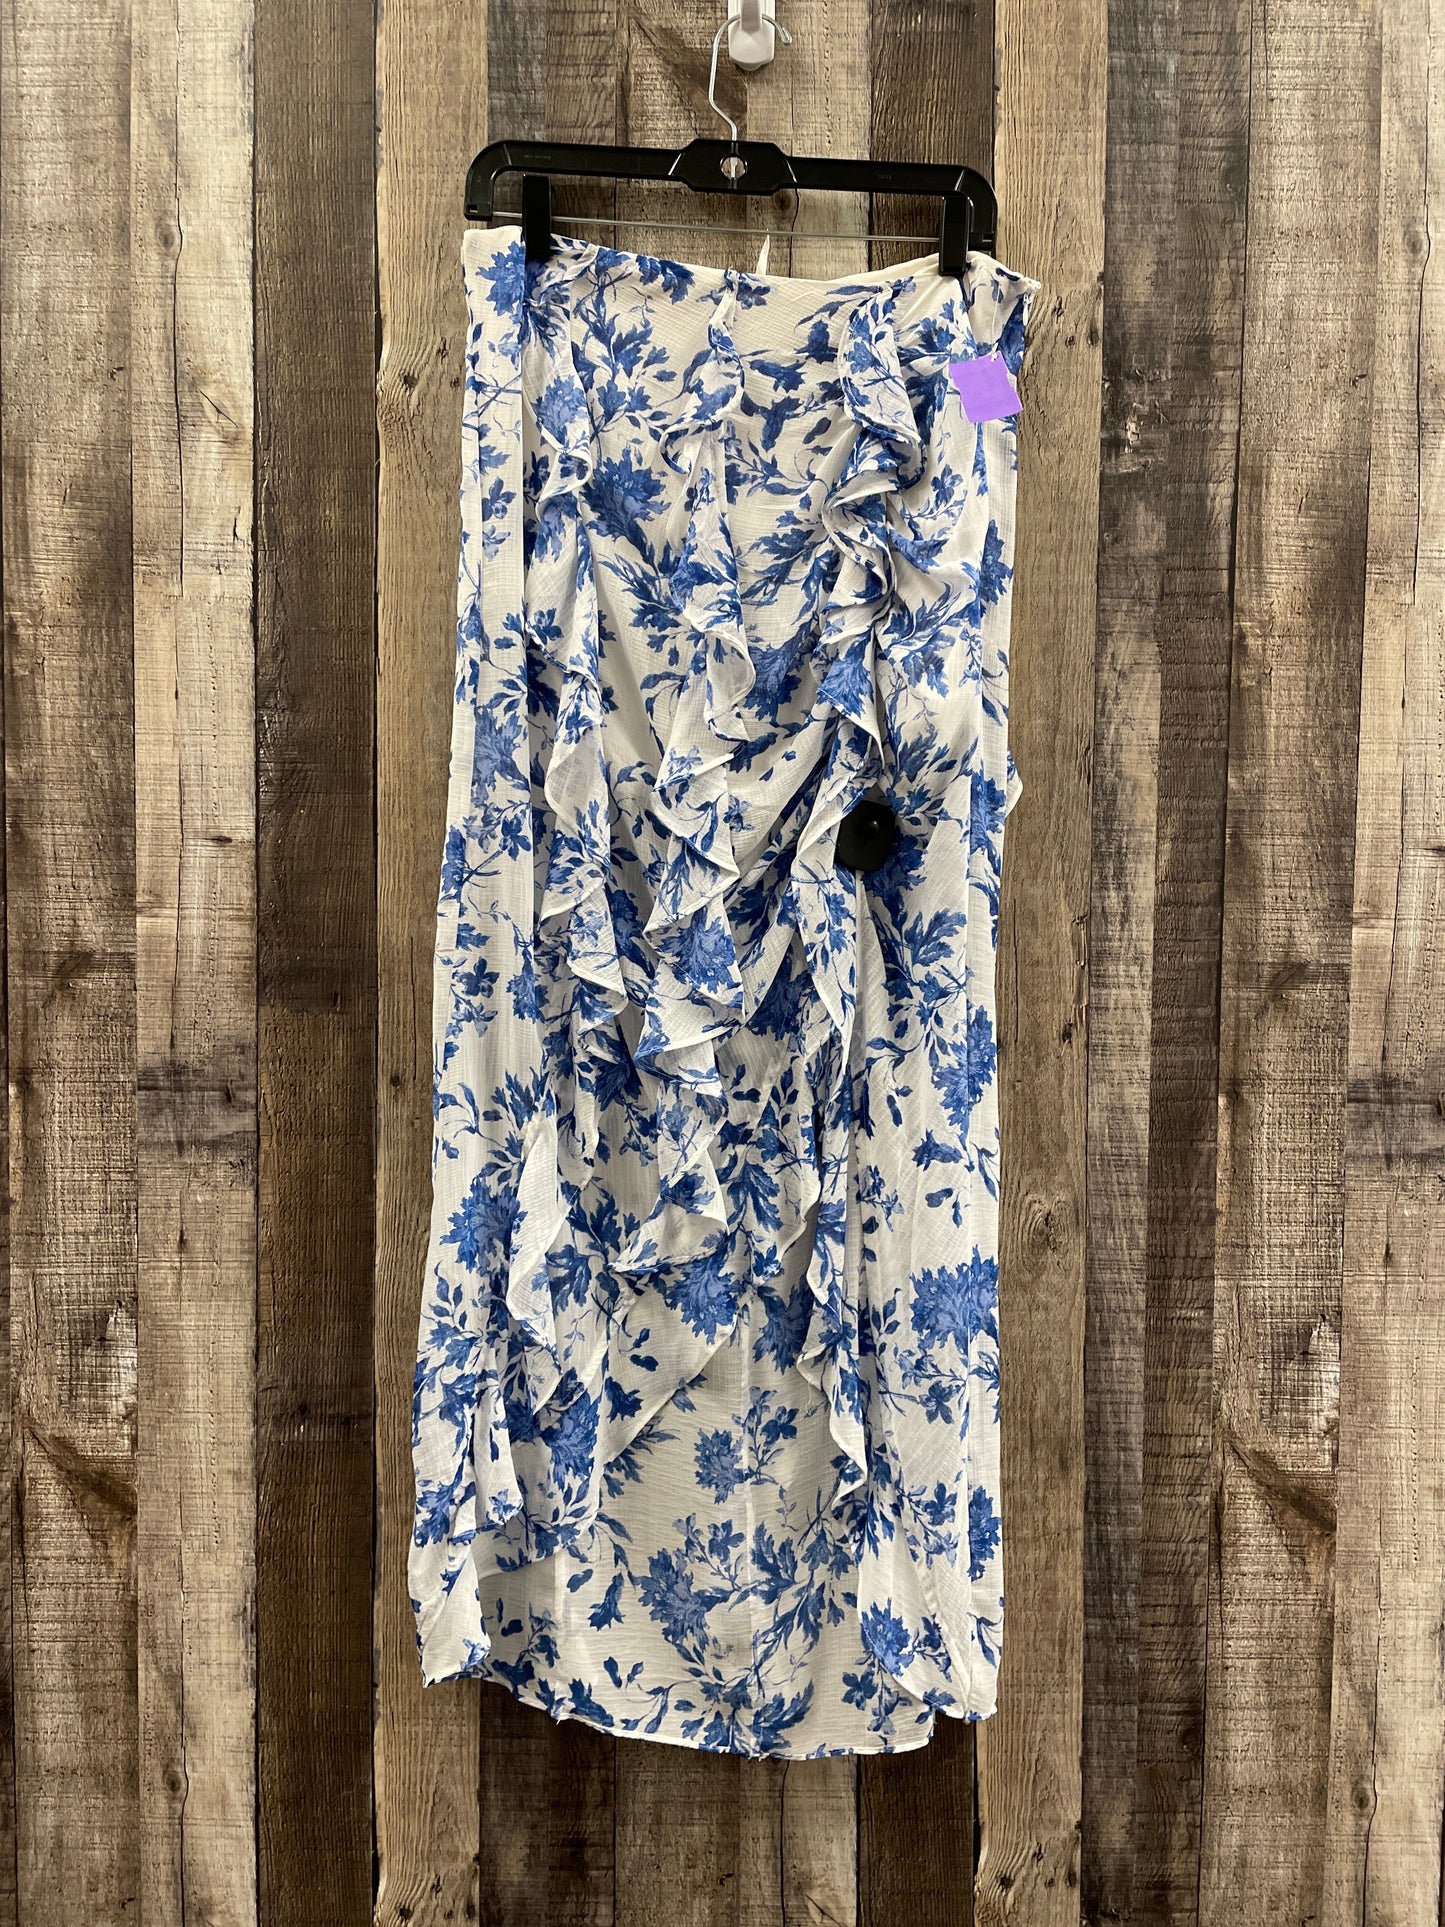 Blue & White Skirt Maxi Free People, Size S